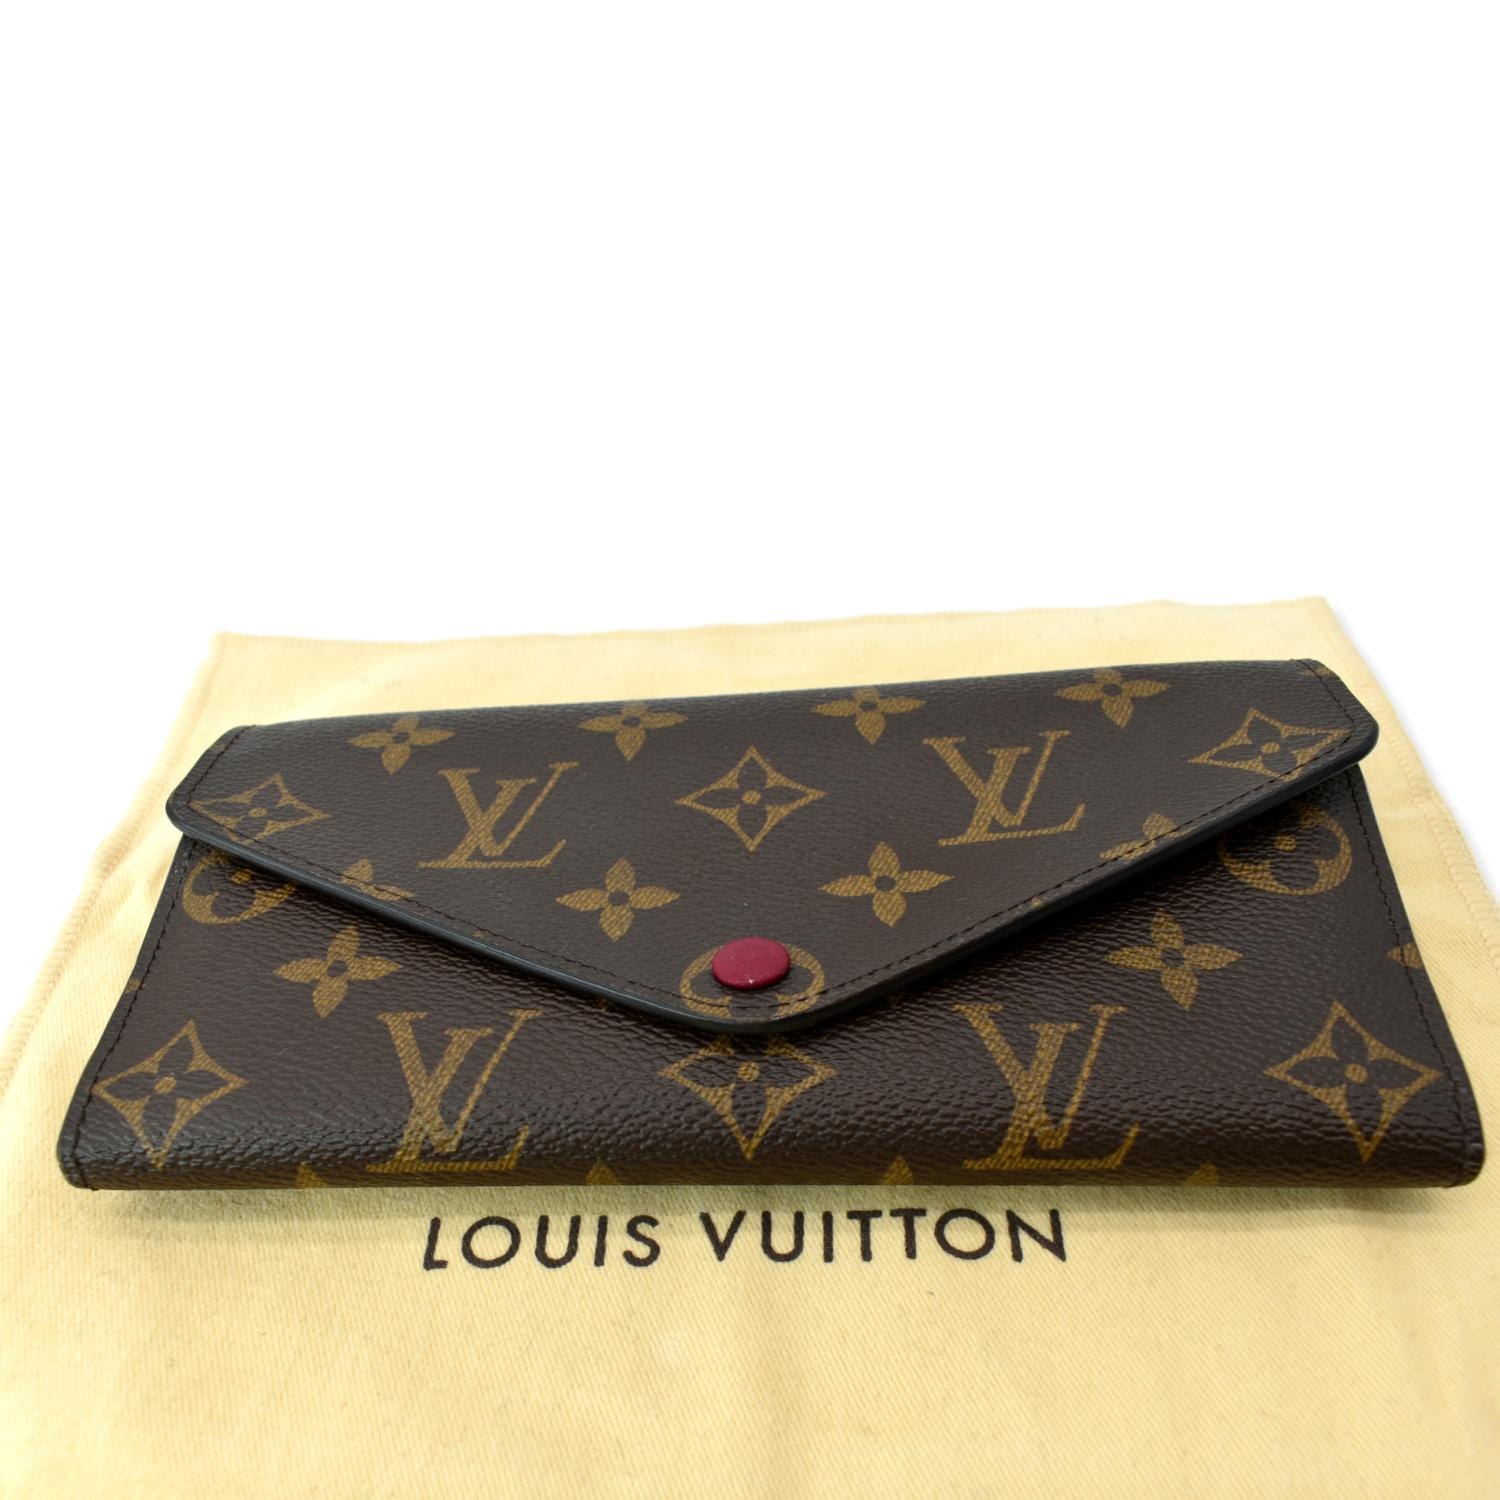 Pin by Josephine Castor on LOUIS VUITTON